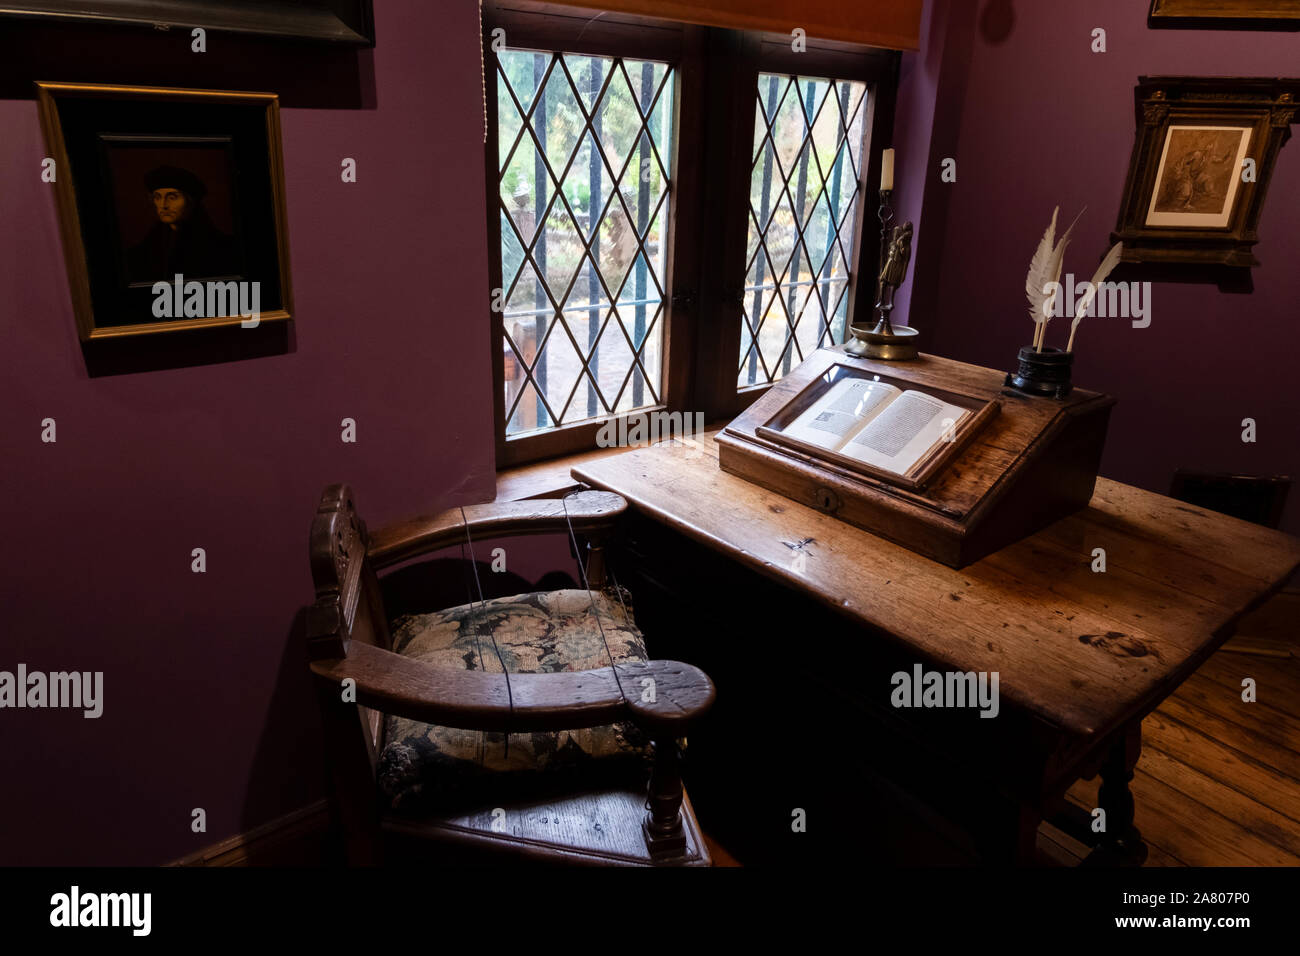 Brussels, Belgium - November 3 2019: Desk with old book in Latin about at the Erasmus house in Anderlecht. Stock Photo